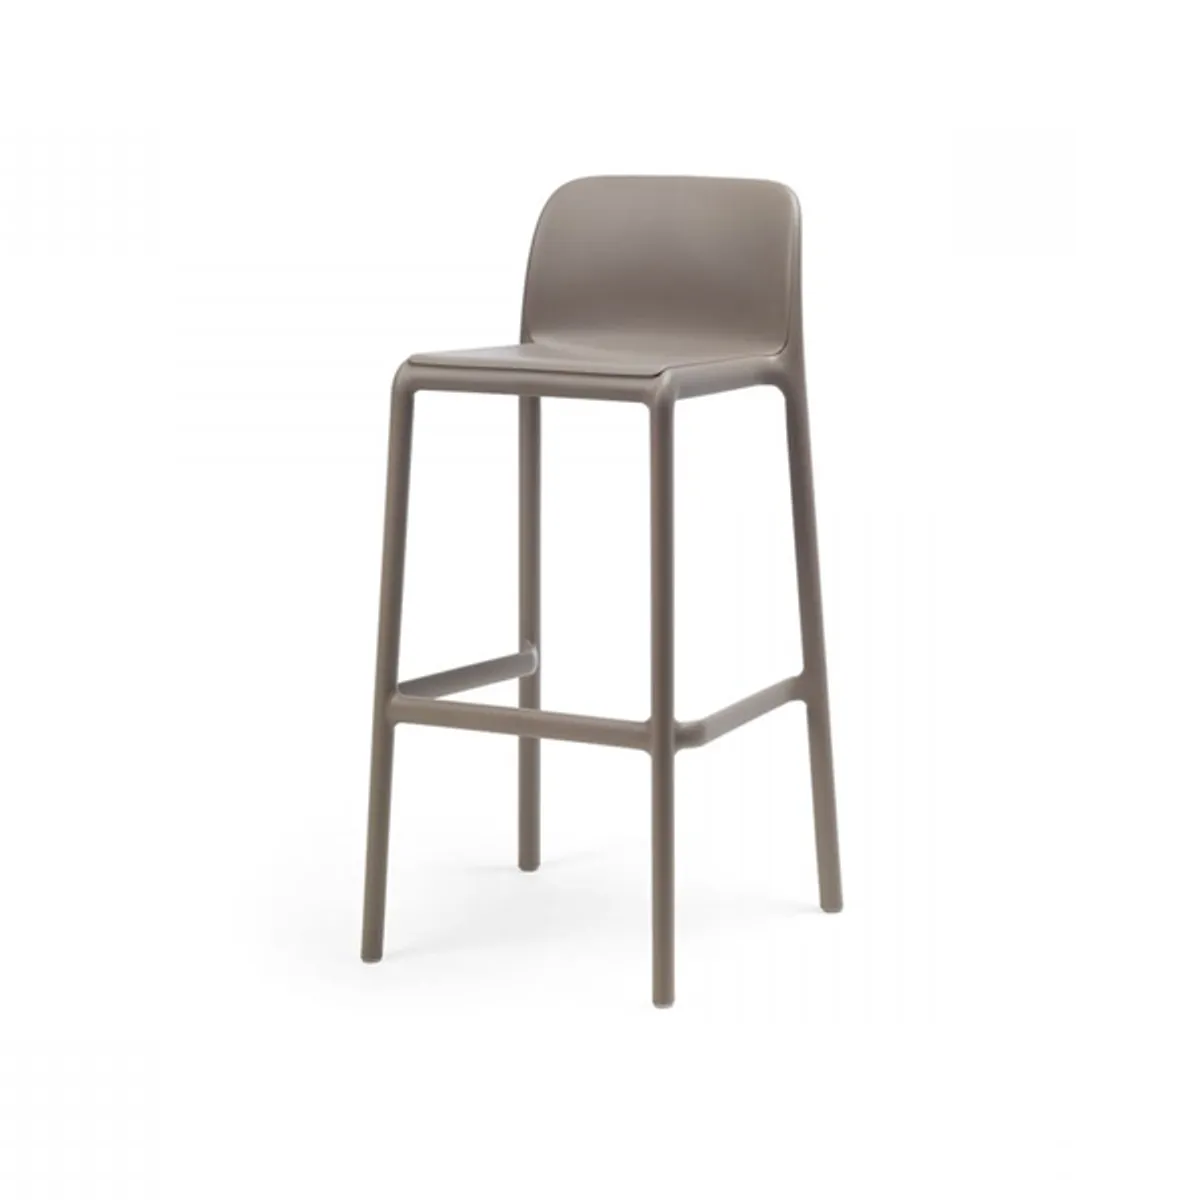 Faro bar stool Inside Out Contracts5